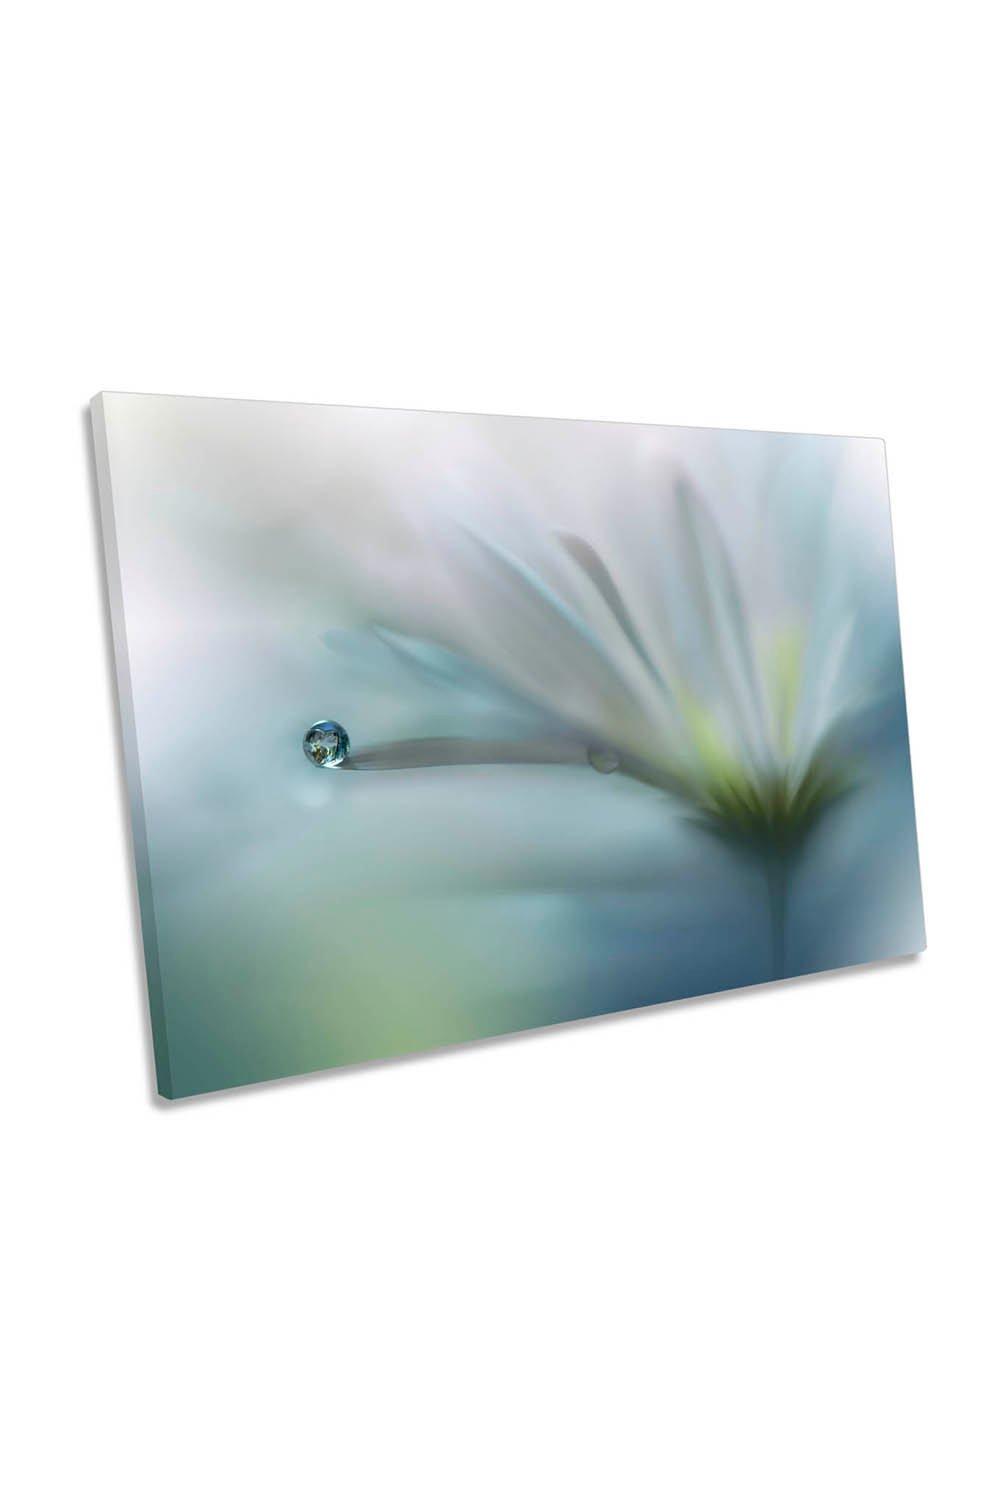 Field of Hope Flower Floral Water Drop Canvas Wall Art Picture Print